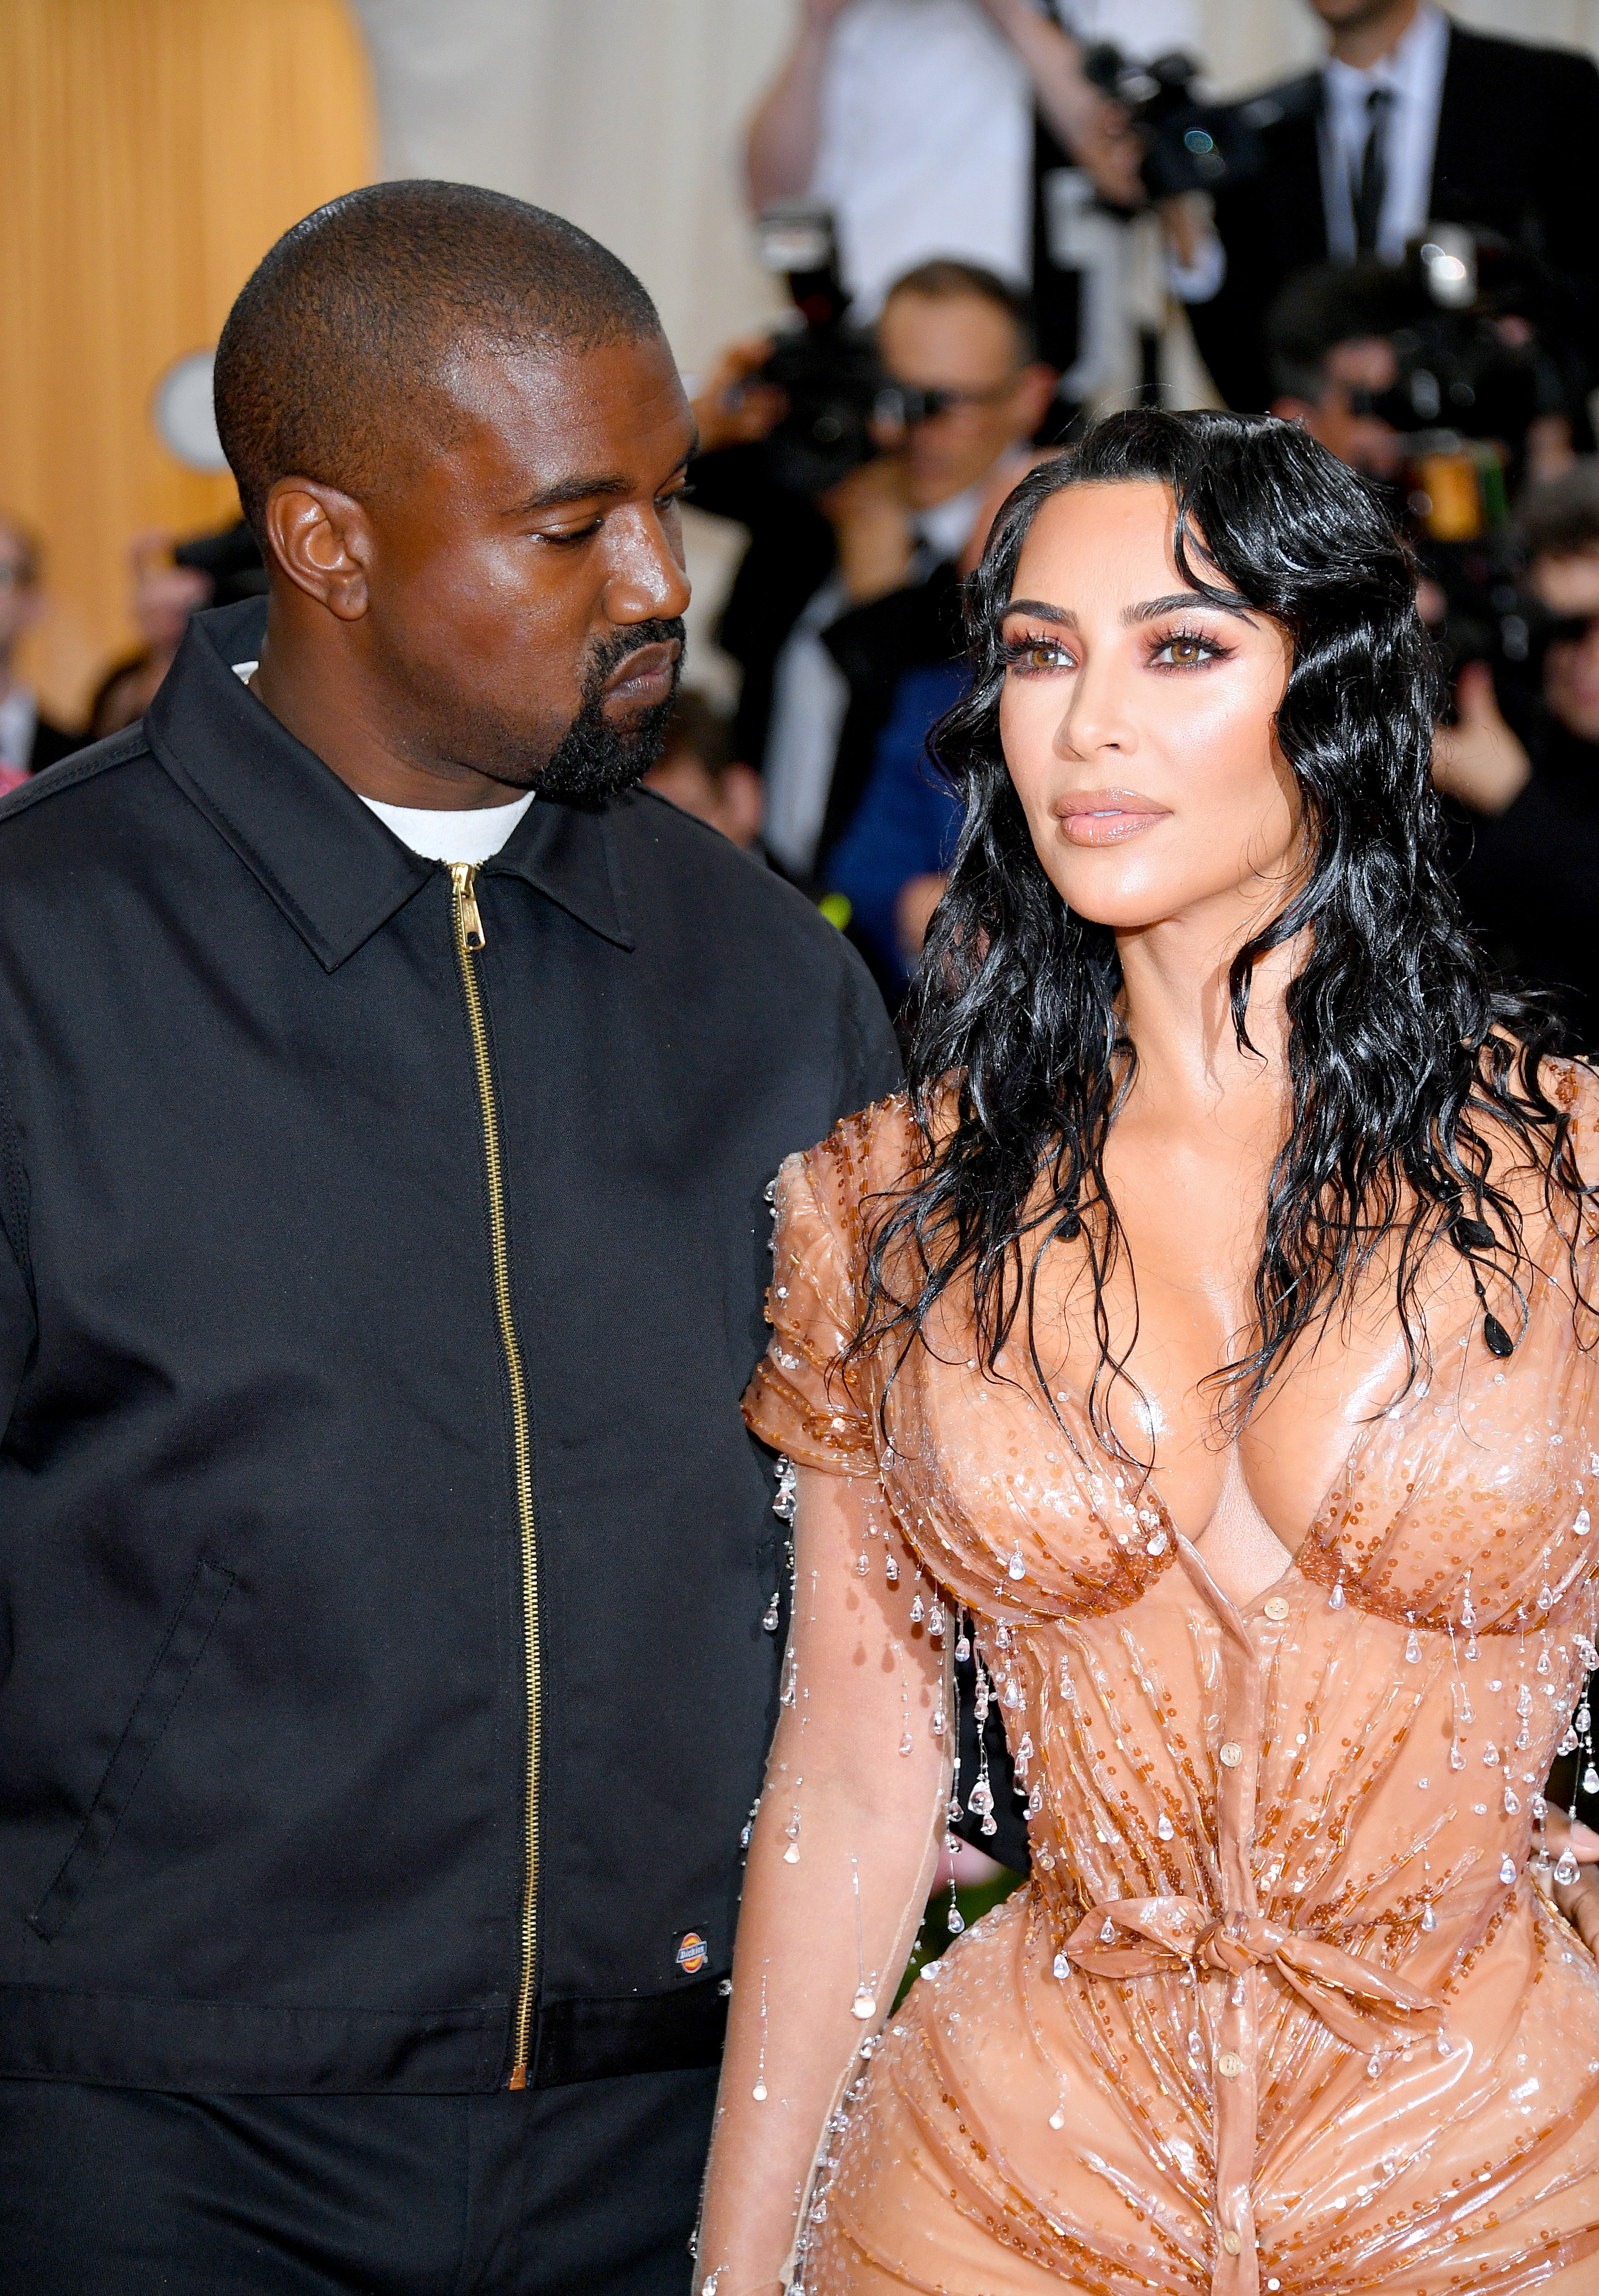 Close-up of Ye and Kim with paparazzi behind them